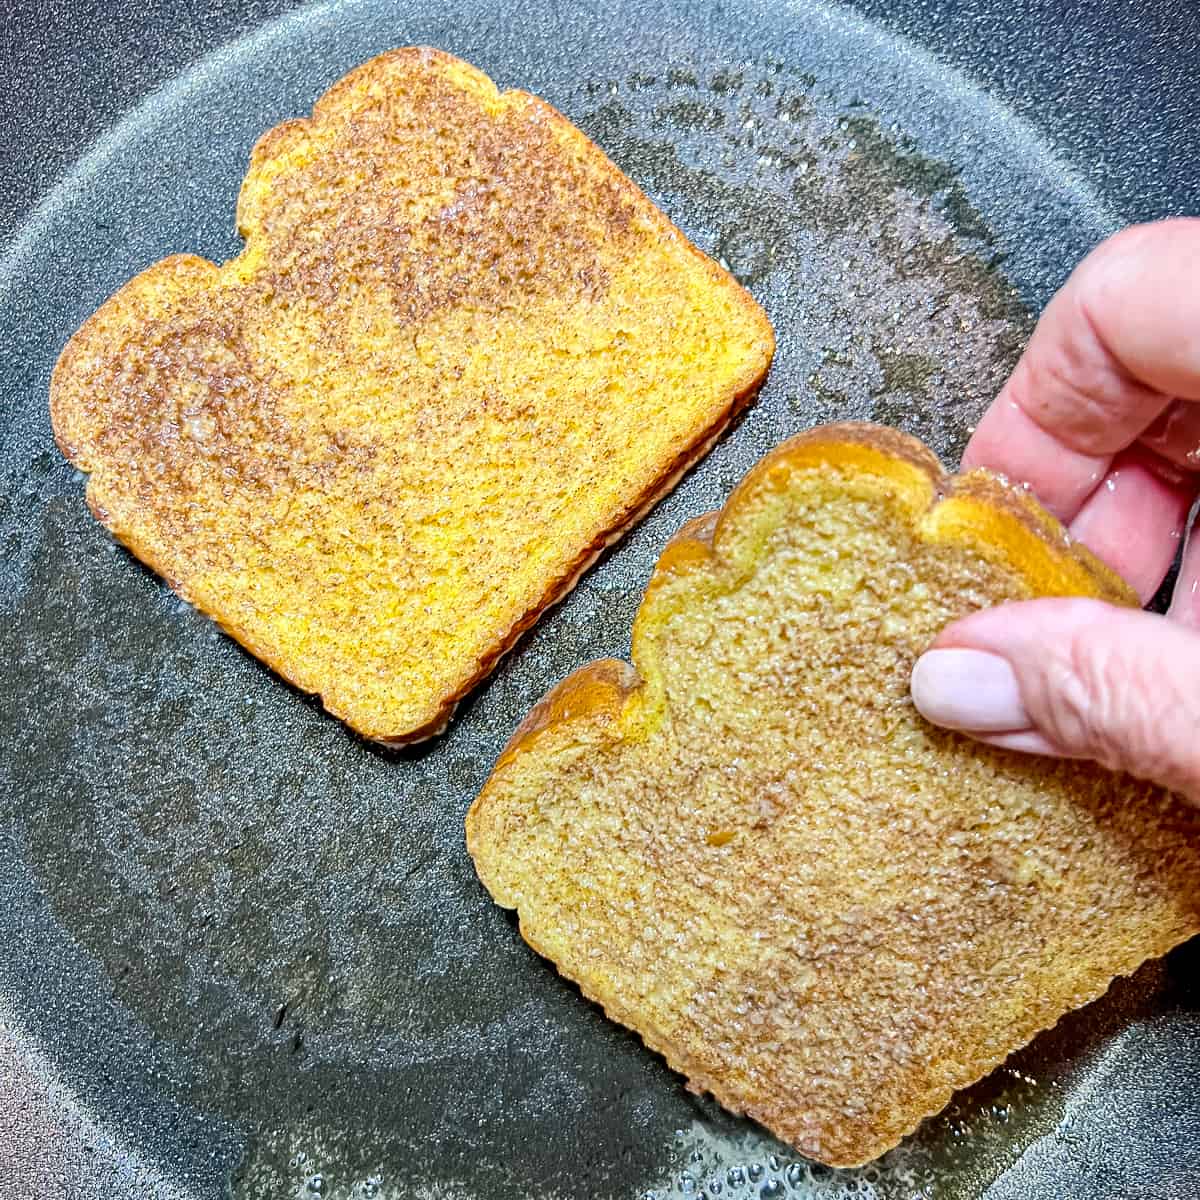 placing two pieces of french toast into a skillet.